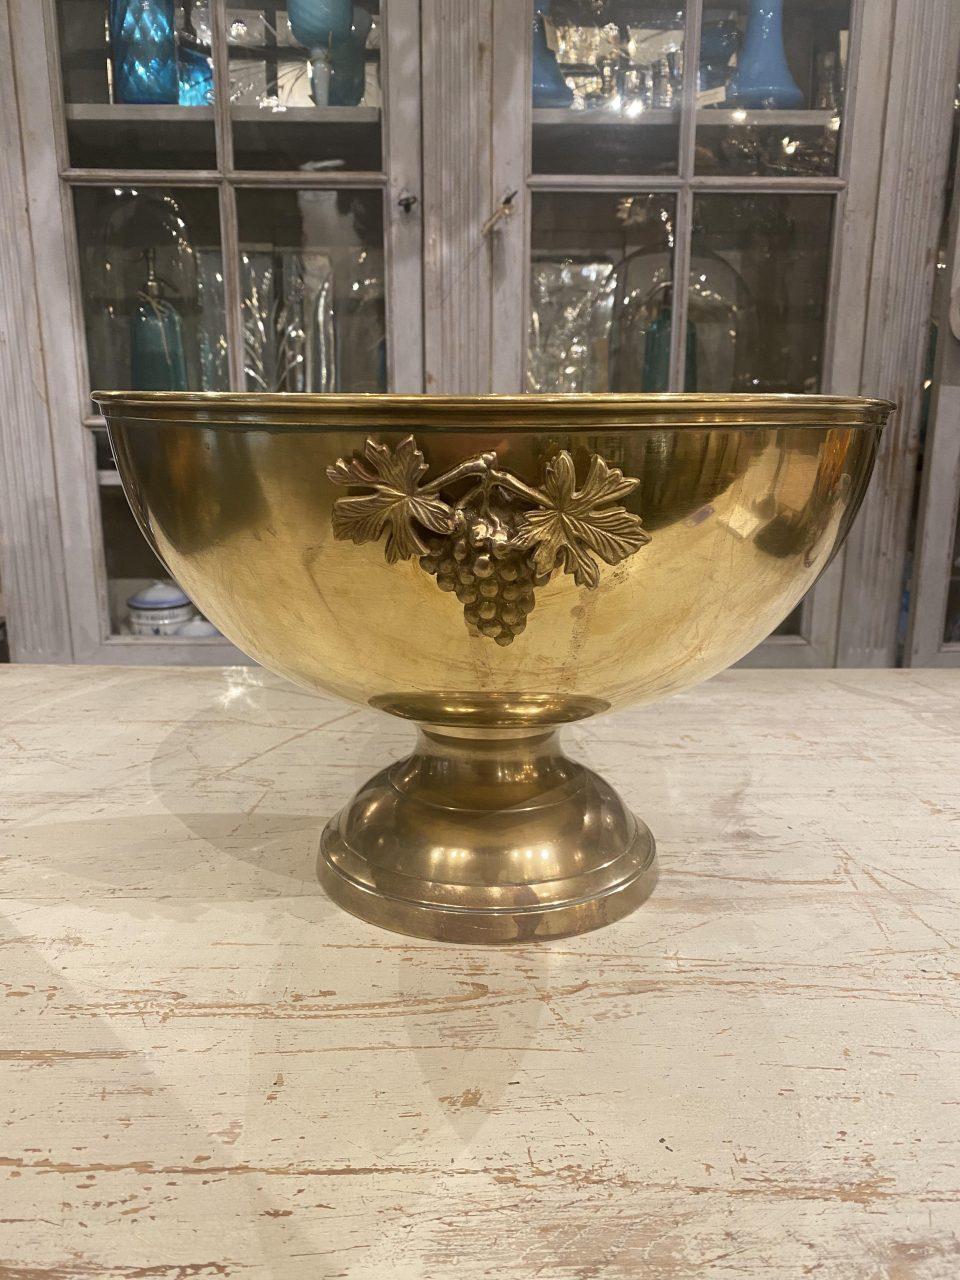 Wonderful French champagne cooler / bucket, beautifully raised on a base. Made of quality brass, and has space for 4-5 bottles in its round bowl. Beautifully decorated with ornamentation of vines and grapes on the side. Lovely patina.